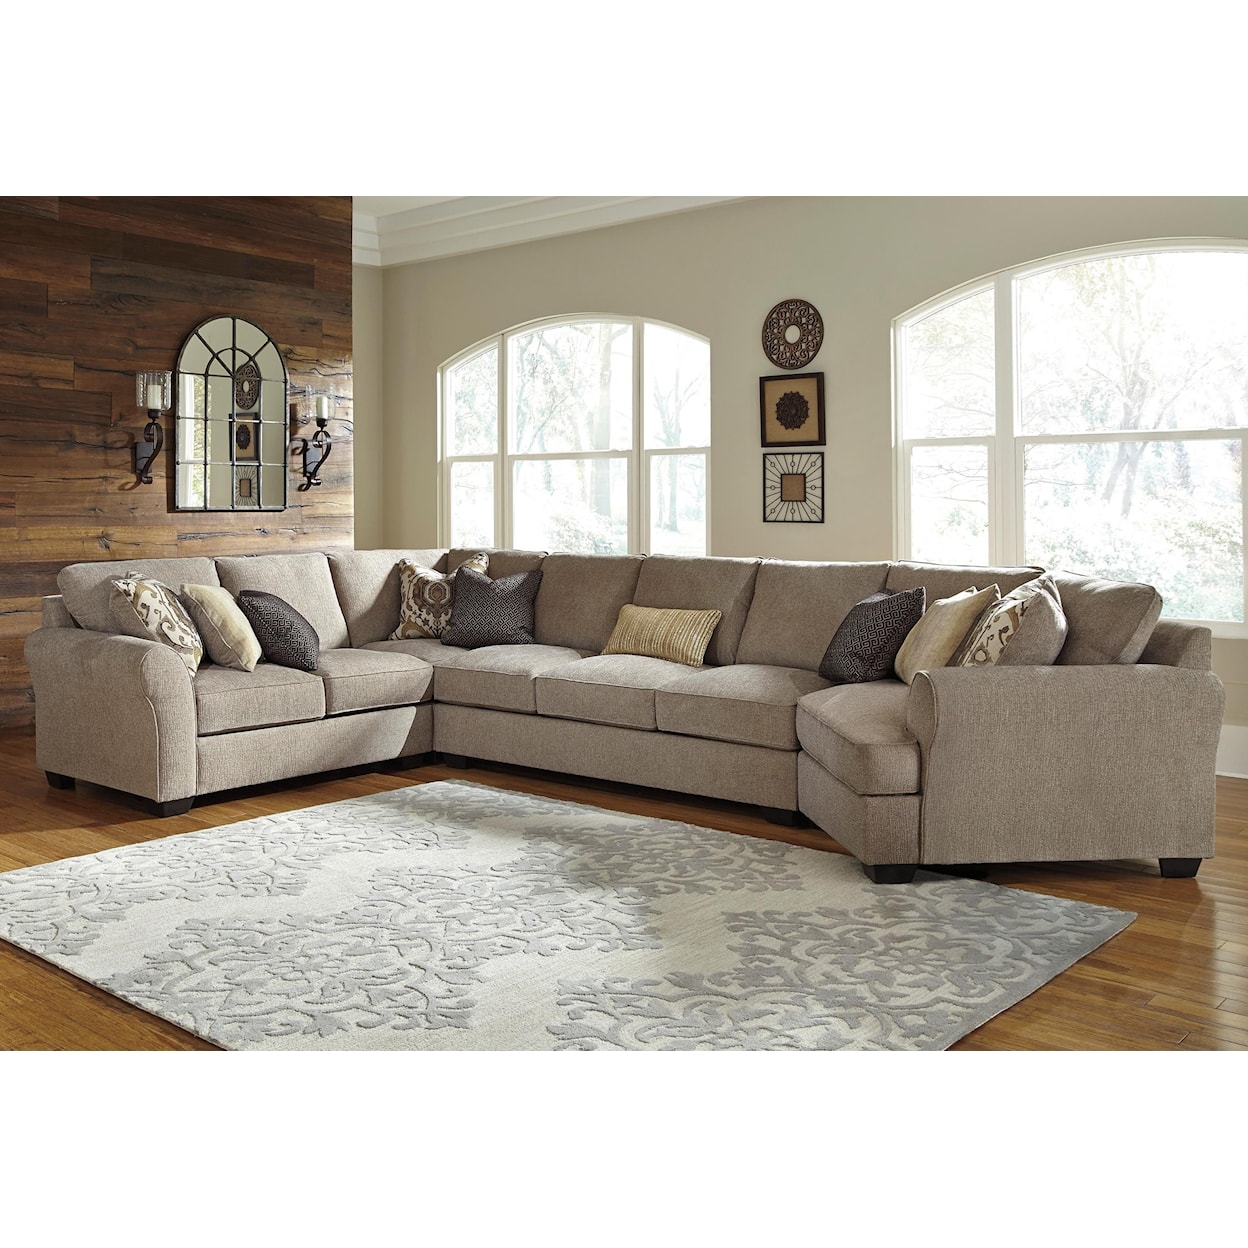 Benchcraft Pantomine 4-Piece Sectional with Cuddler